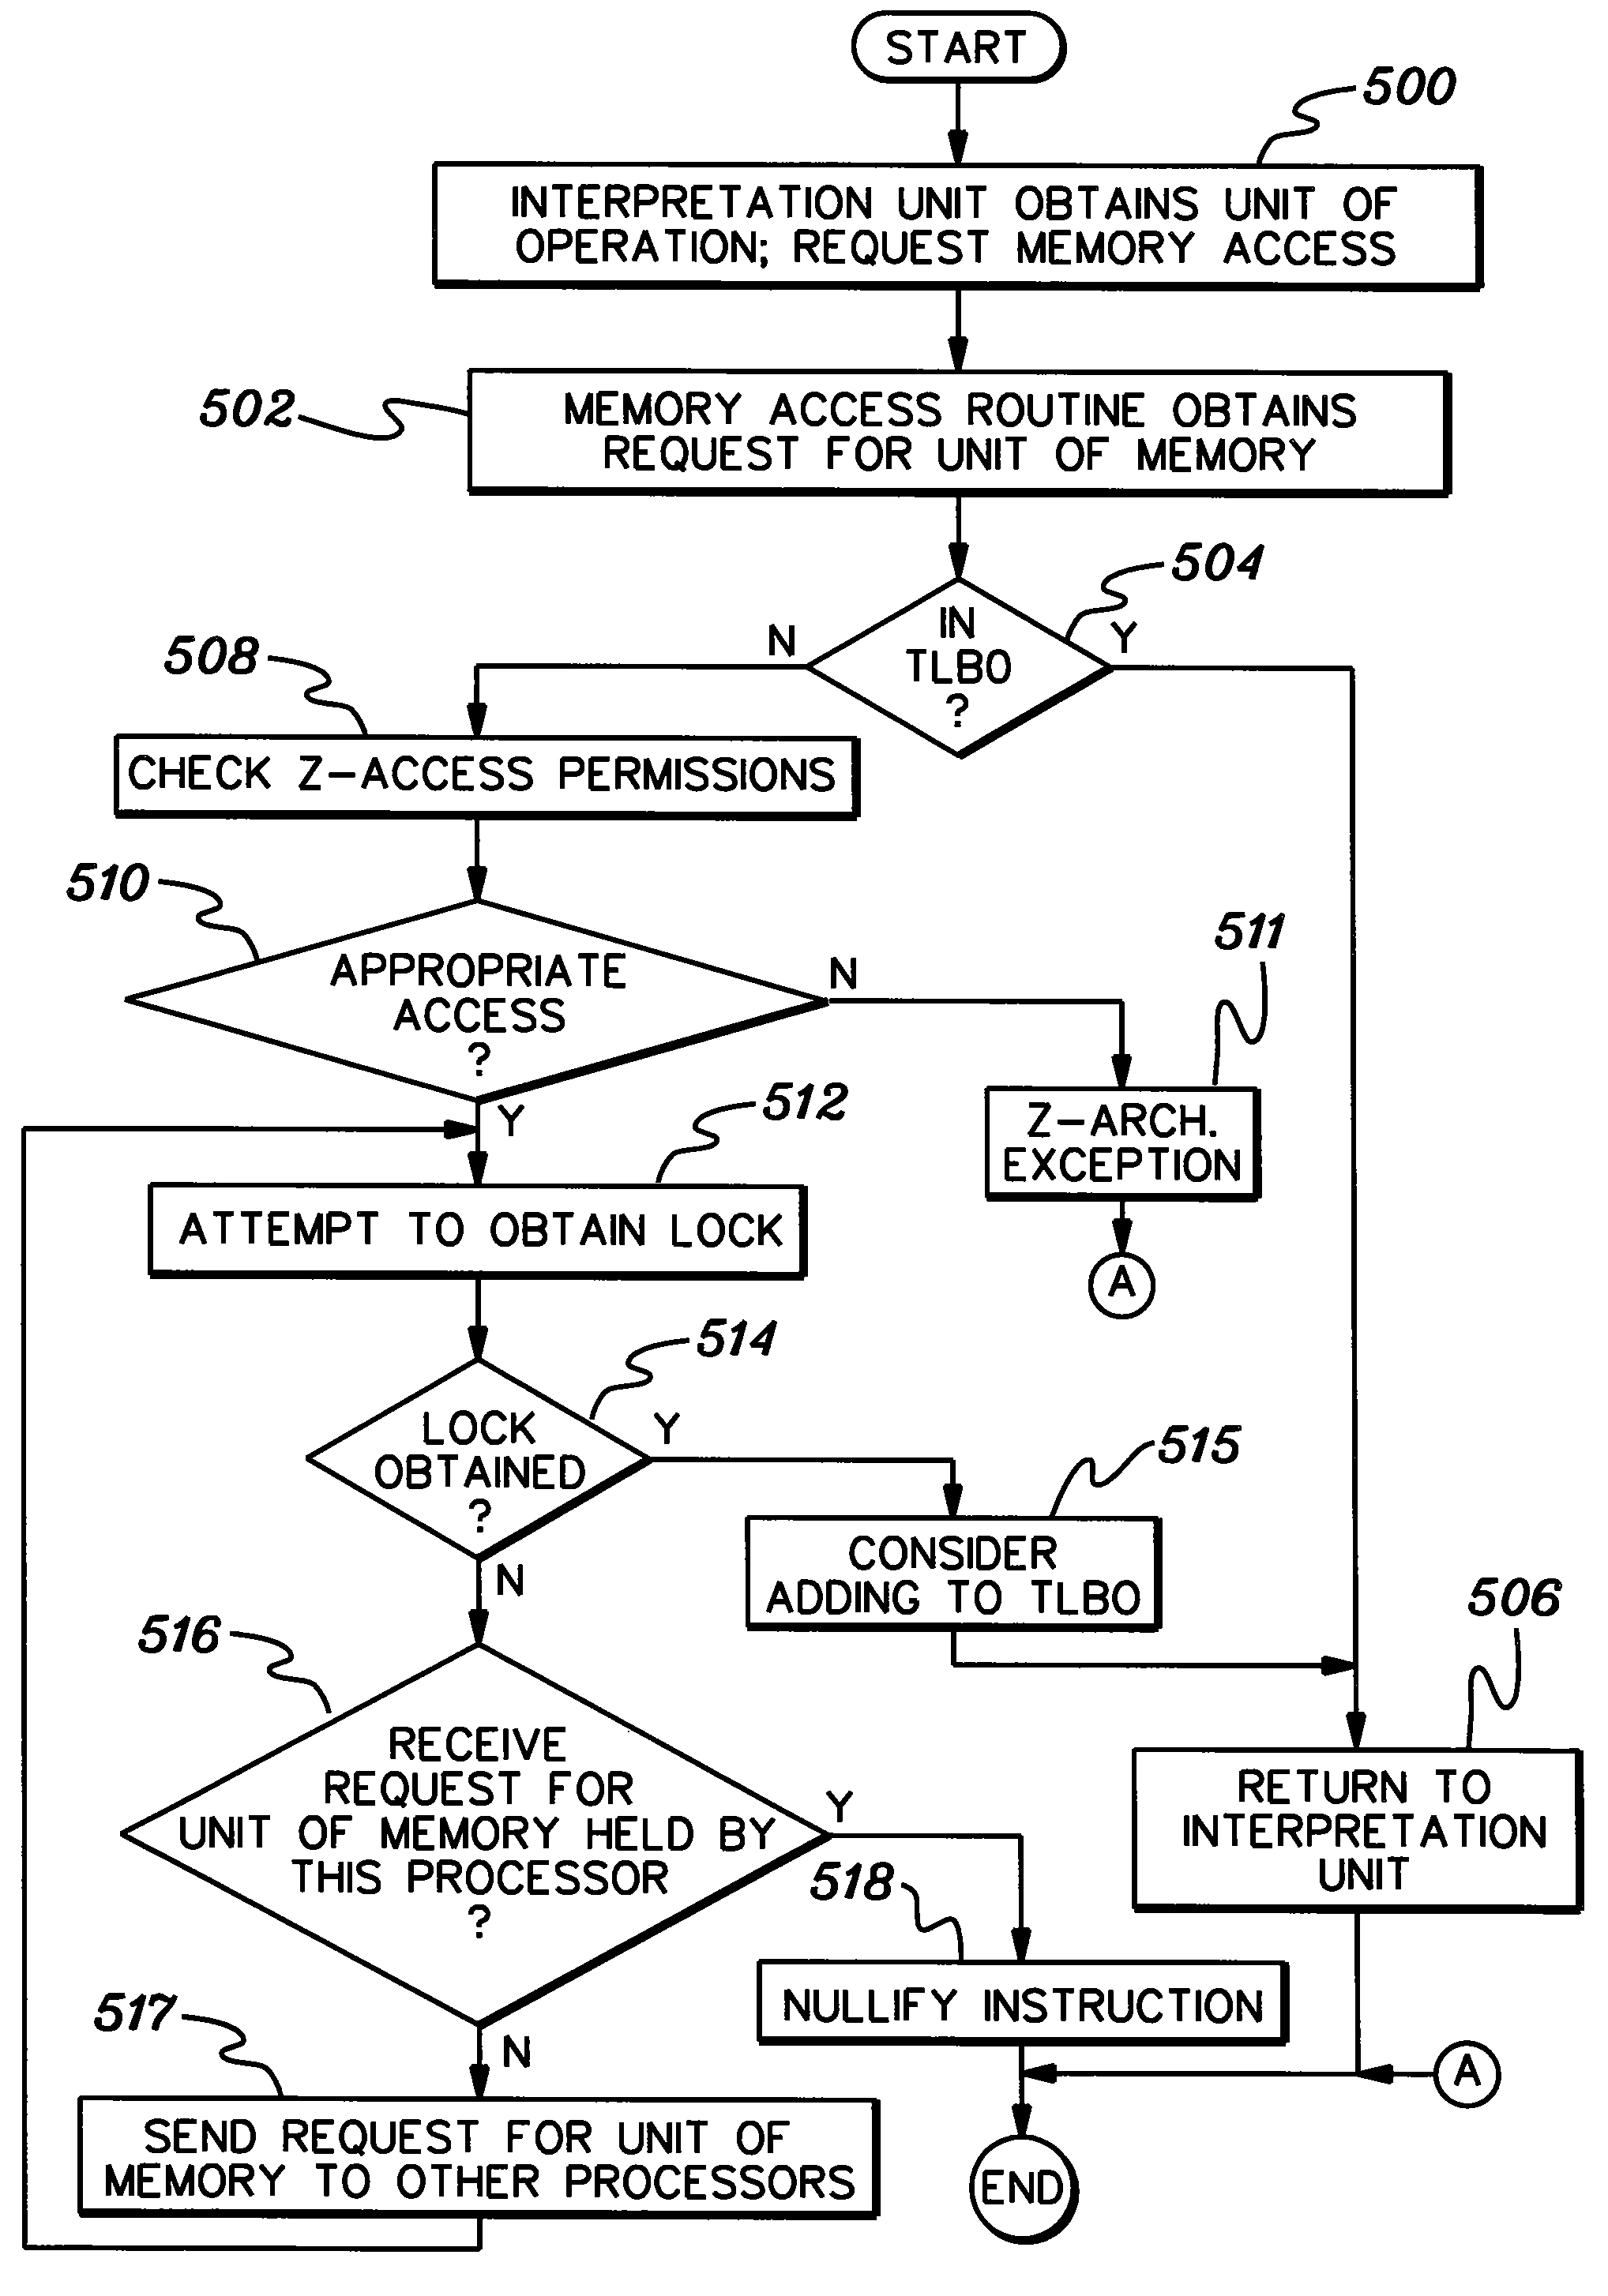 Providing memory consistency in an emulated processing environment